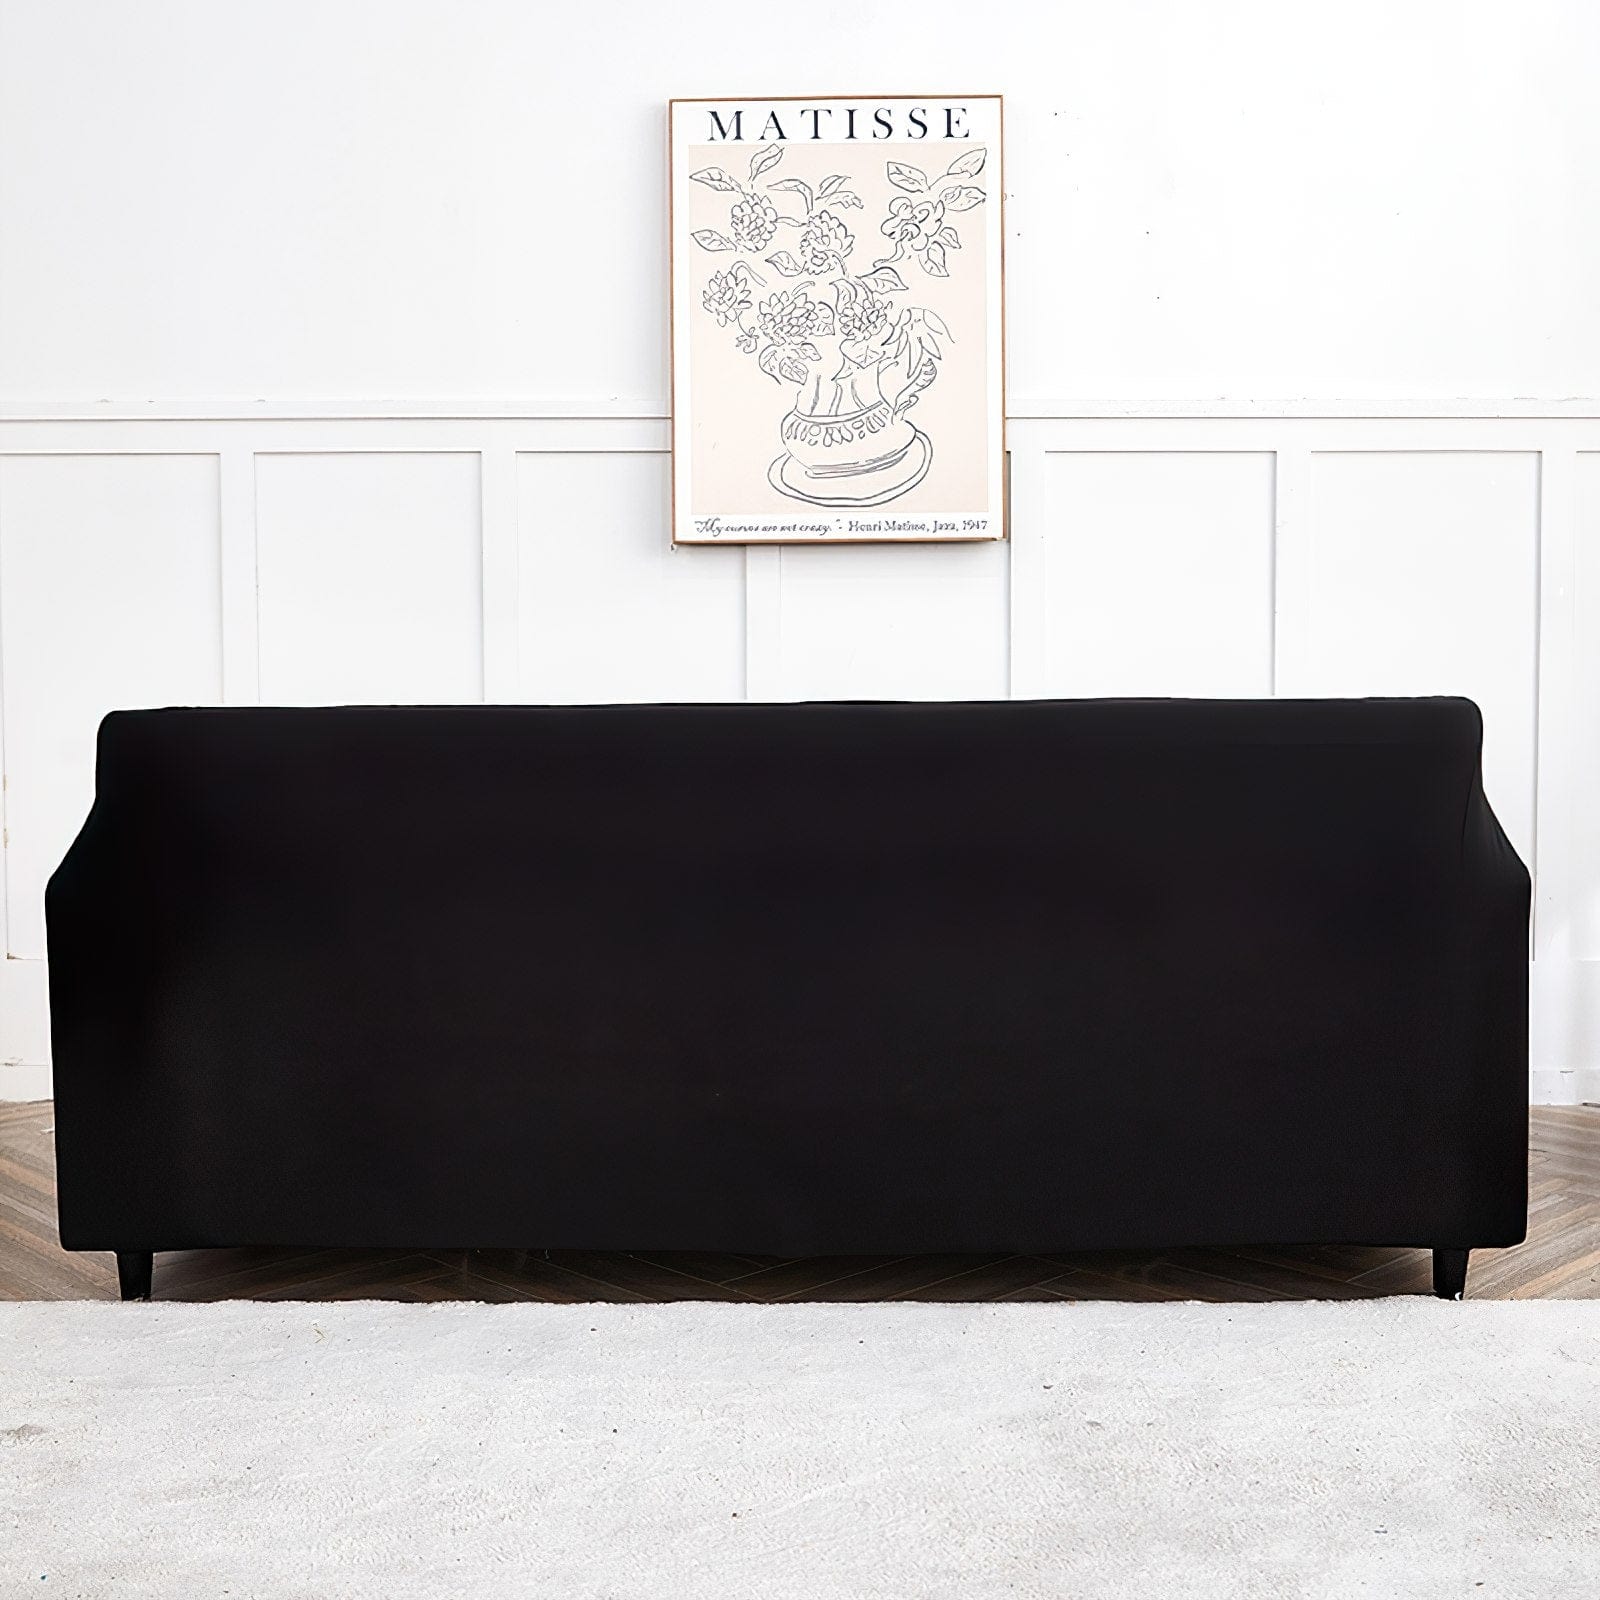 Black - Extendable Armchair and Sofa Covers - The Sofa Cover House